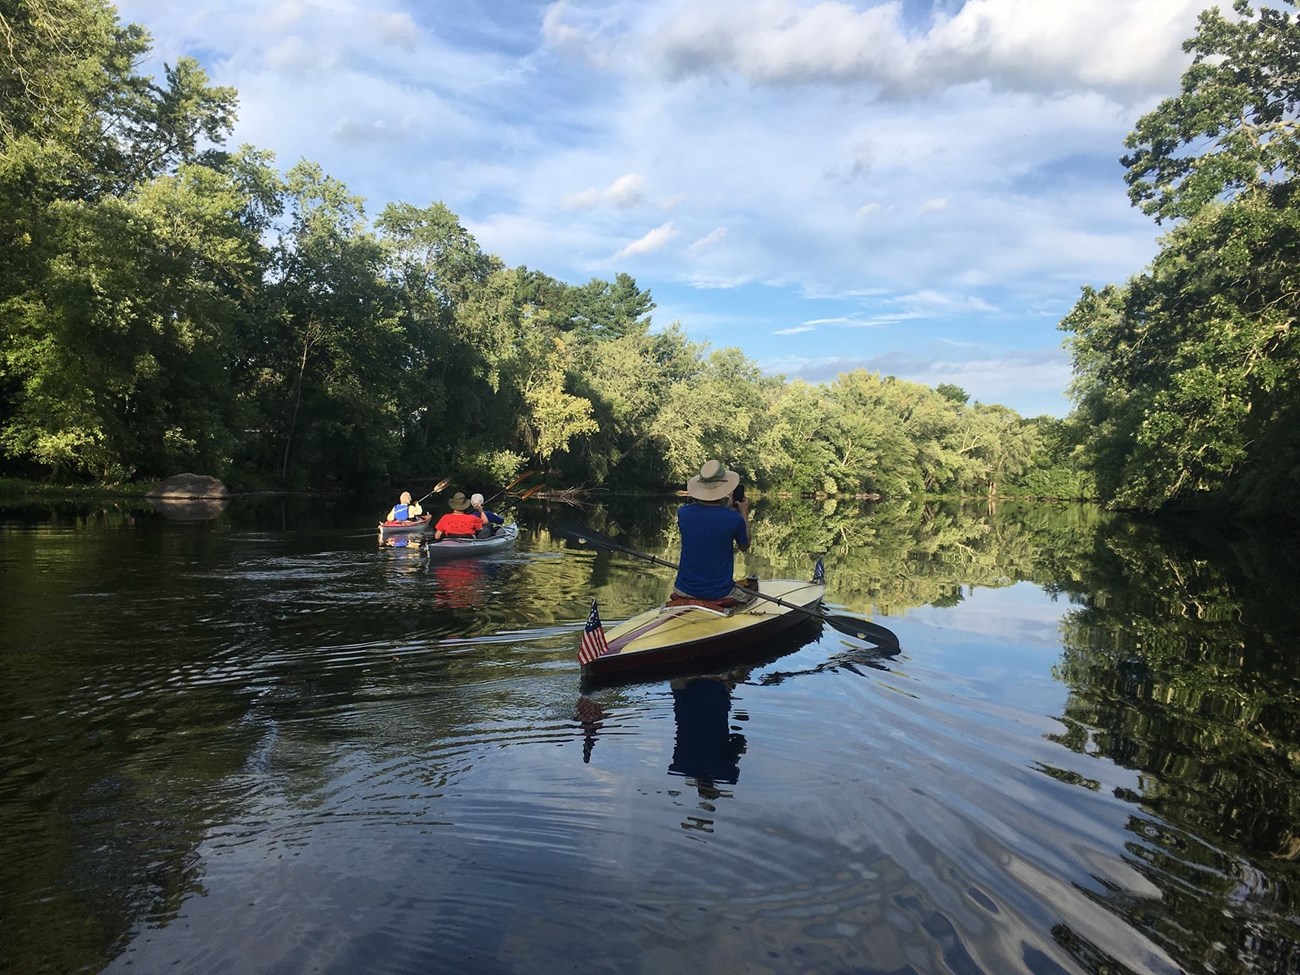 The Sudbury, Assabet and Concord Rivers provide a wide range of recreational opportunities to people within Greater Boston and beyond. To learn more view the River Recreation Map from OARS. Paddling on the Concord River, Photo Credit: Marlies Henderson.